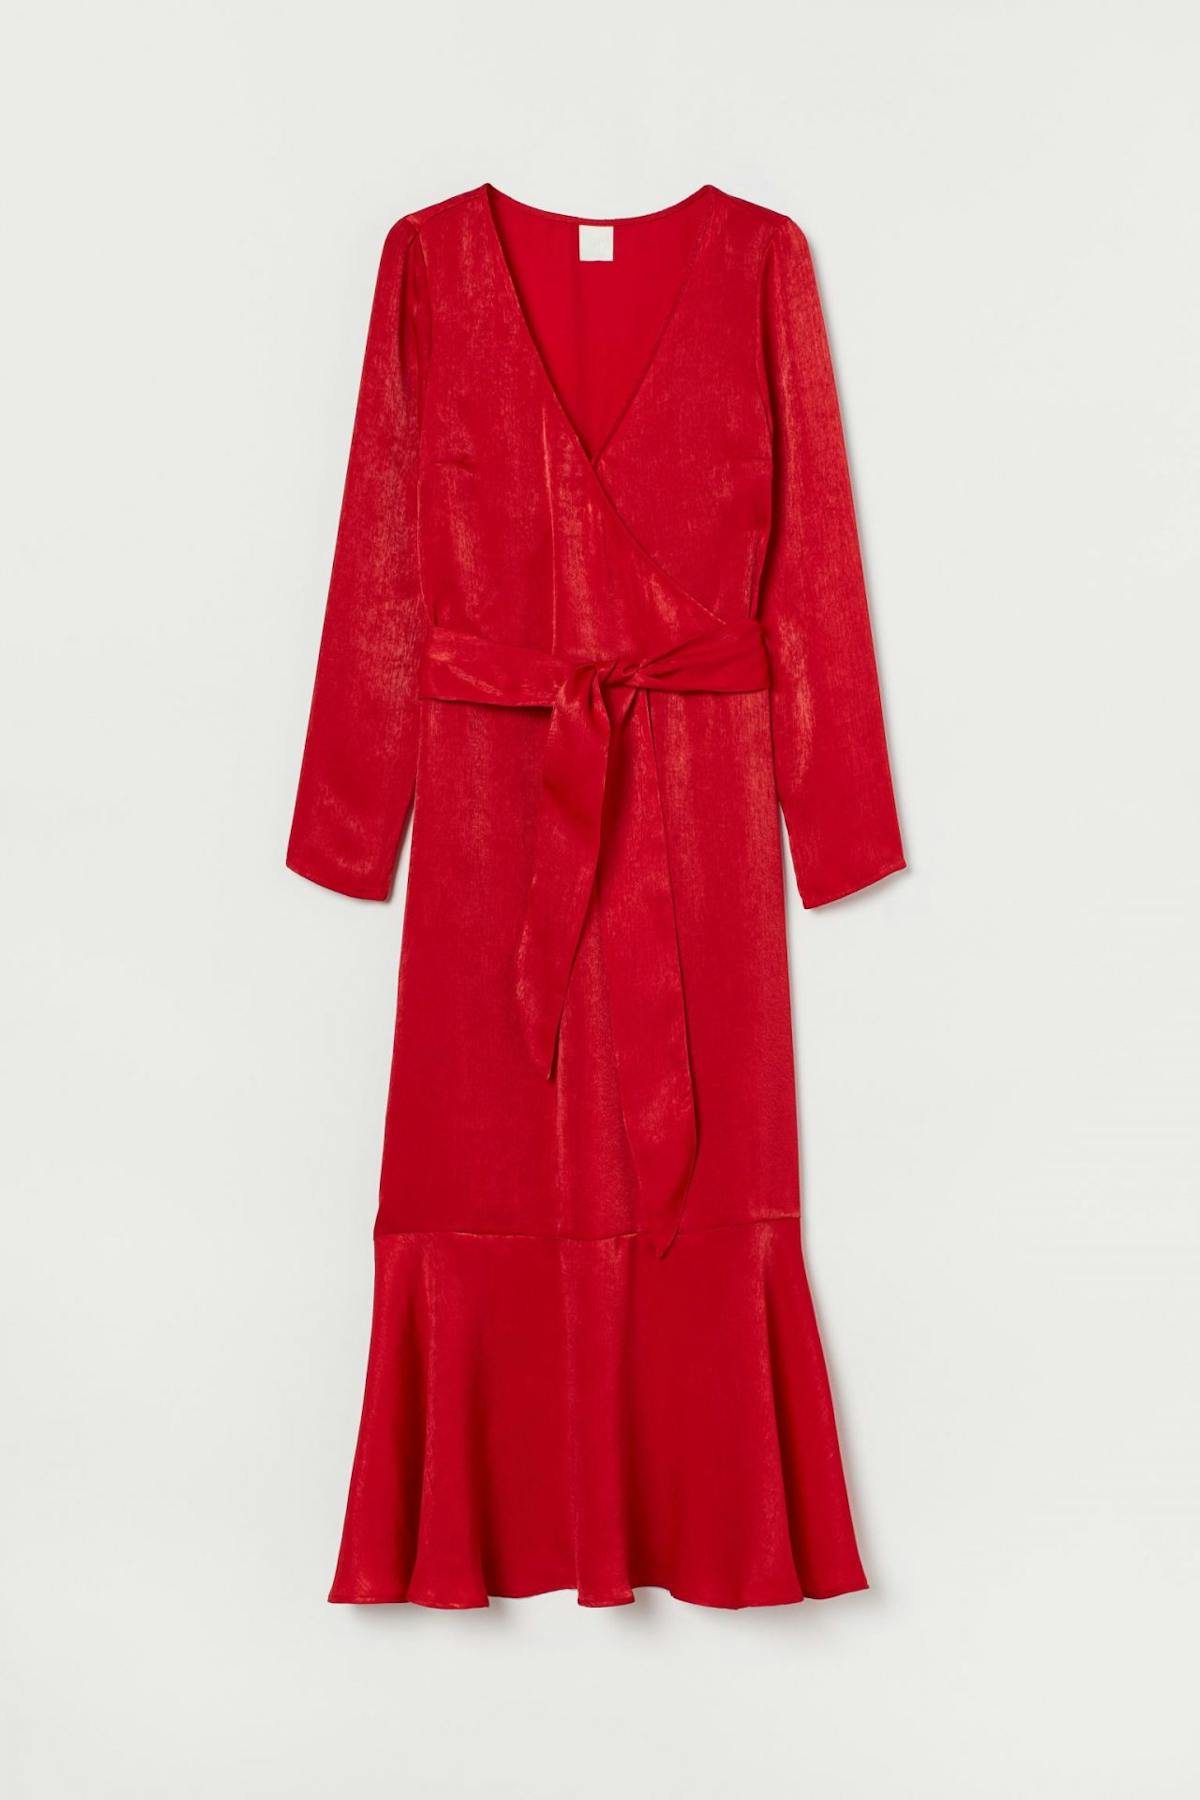 Best dresses for Christmas day: H&M red wrap dress